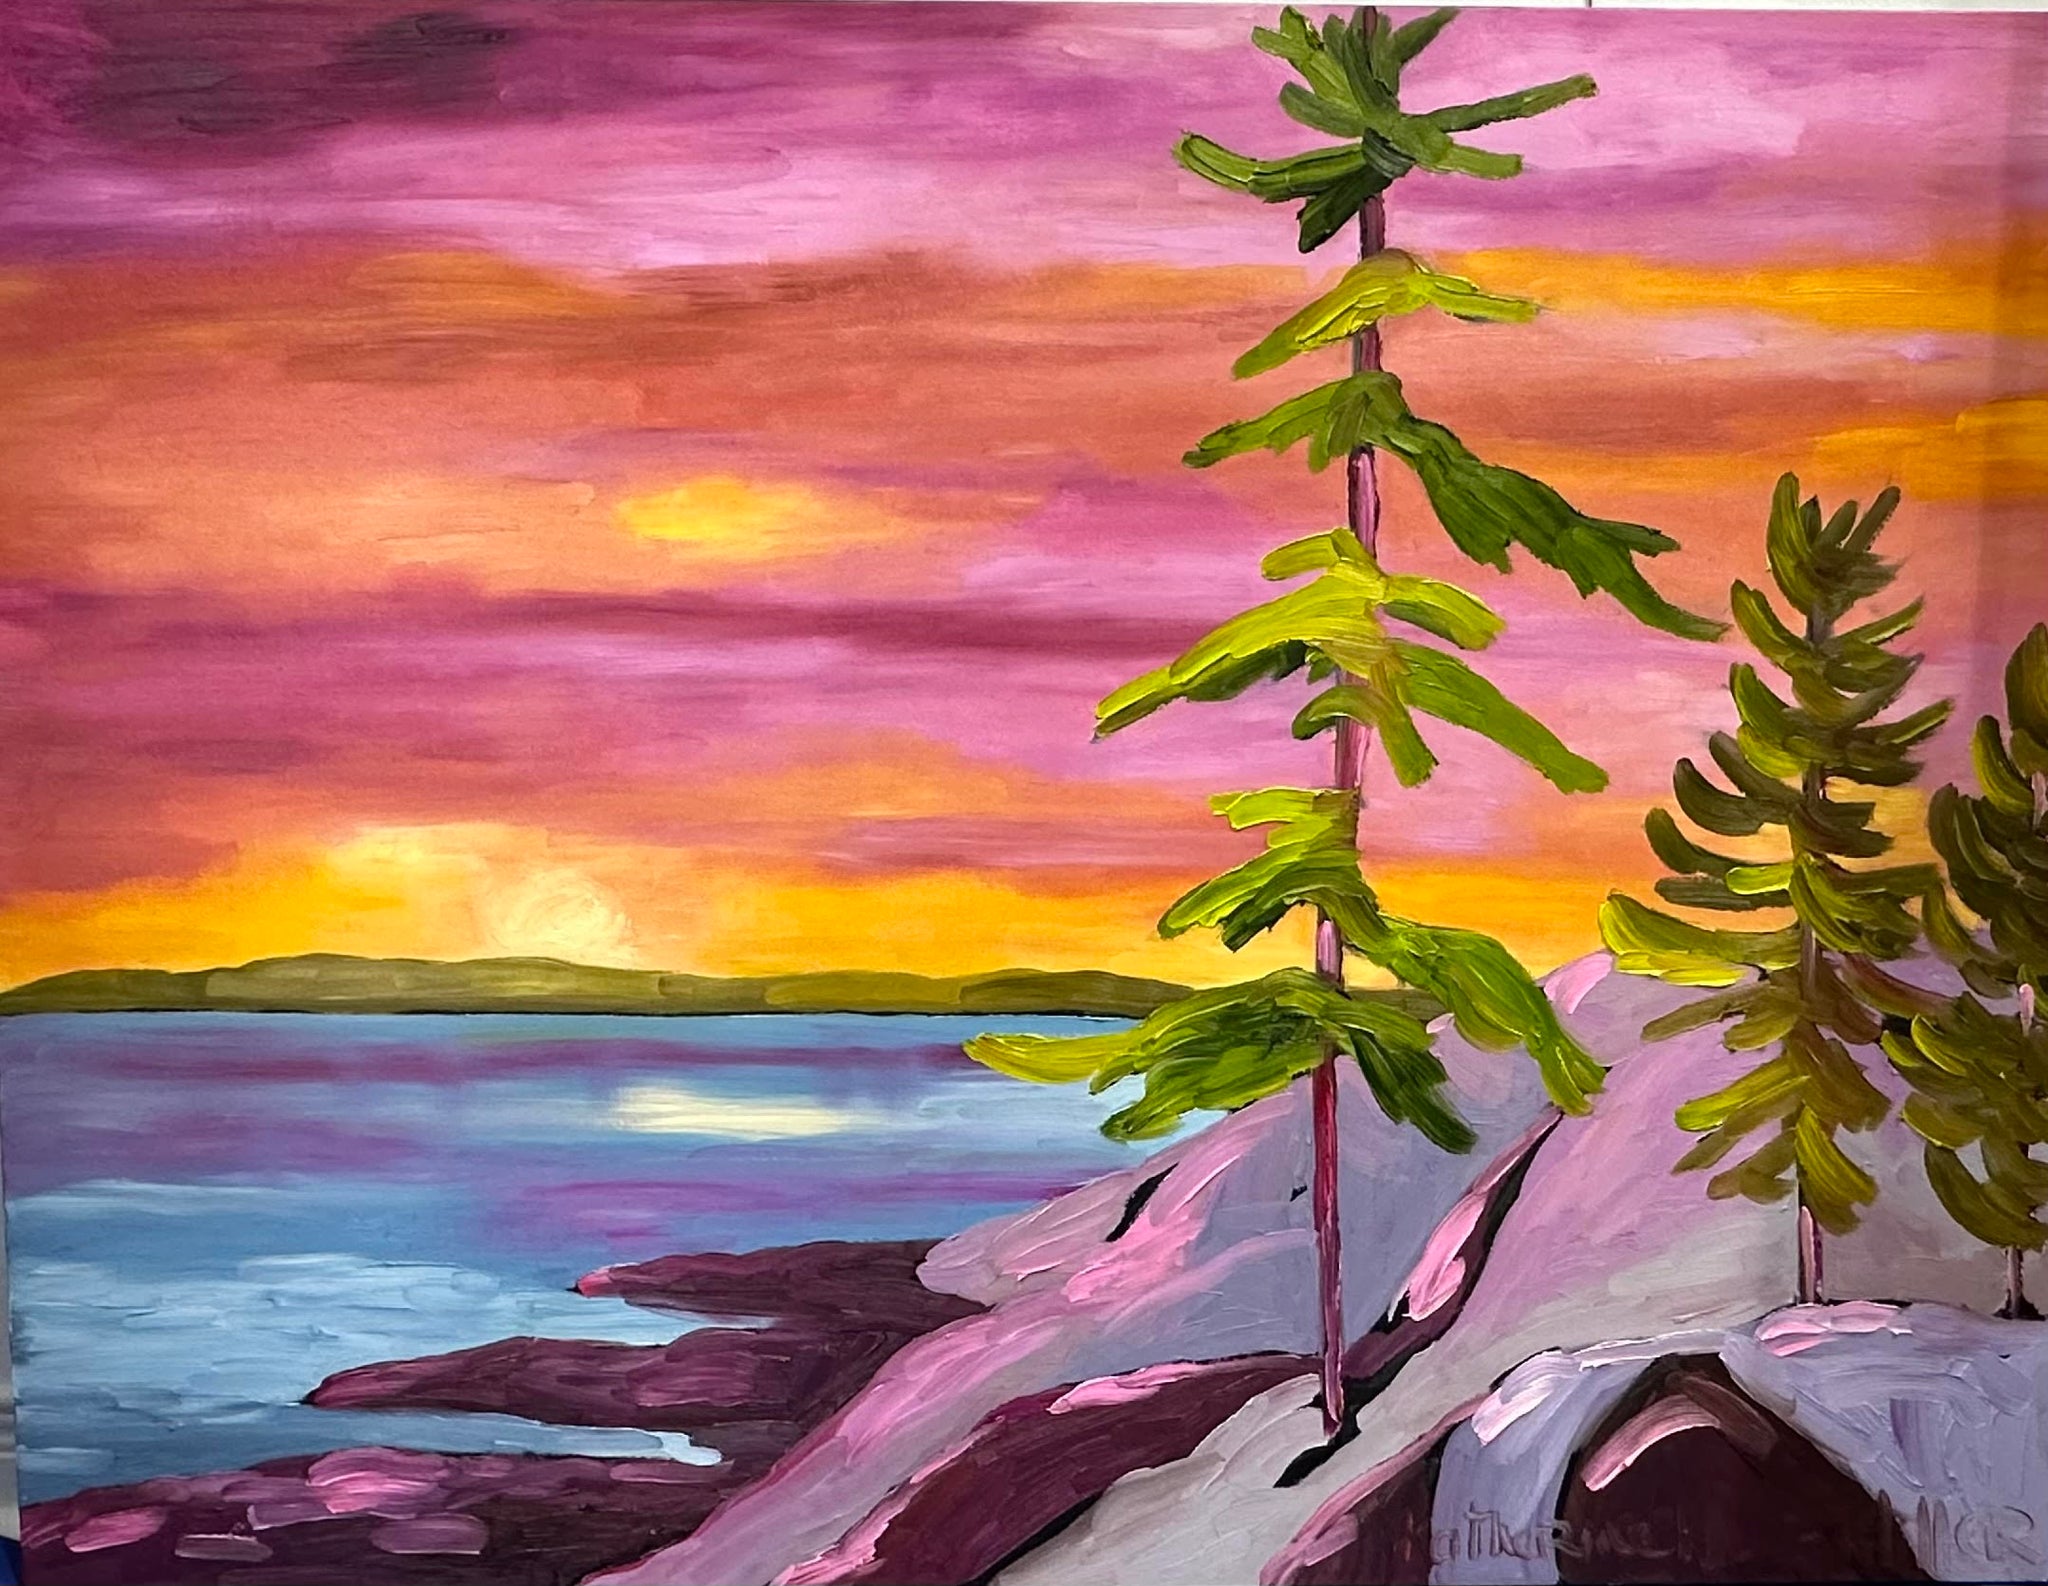 'A Moment in Time' Northern Ontario-inspired